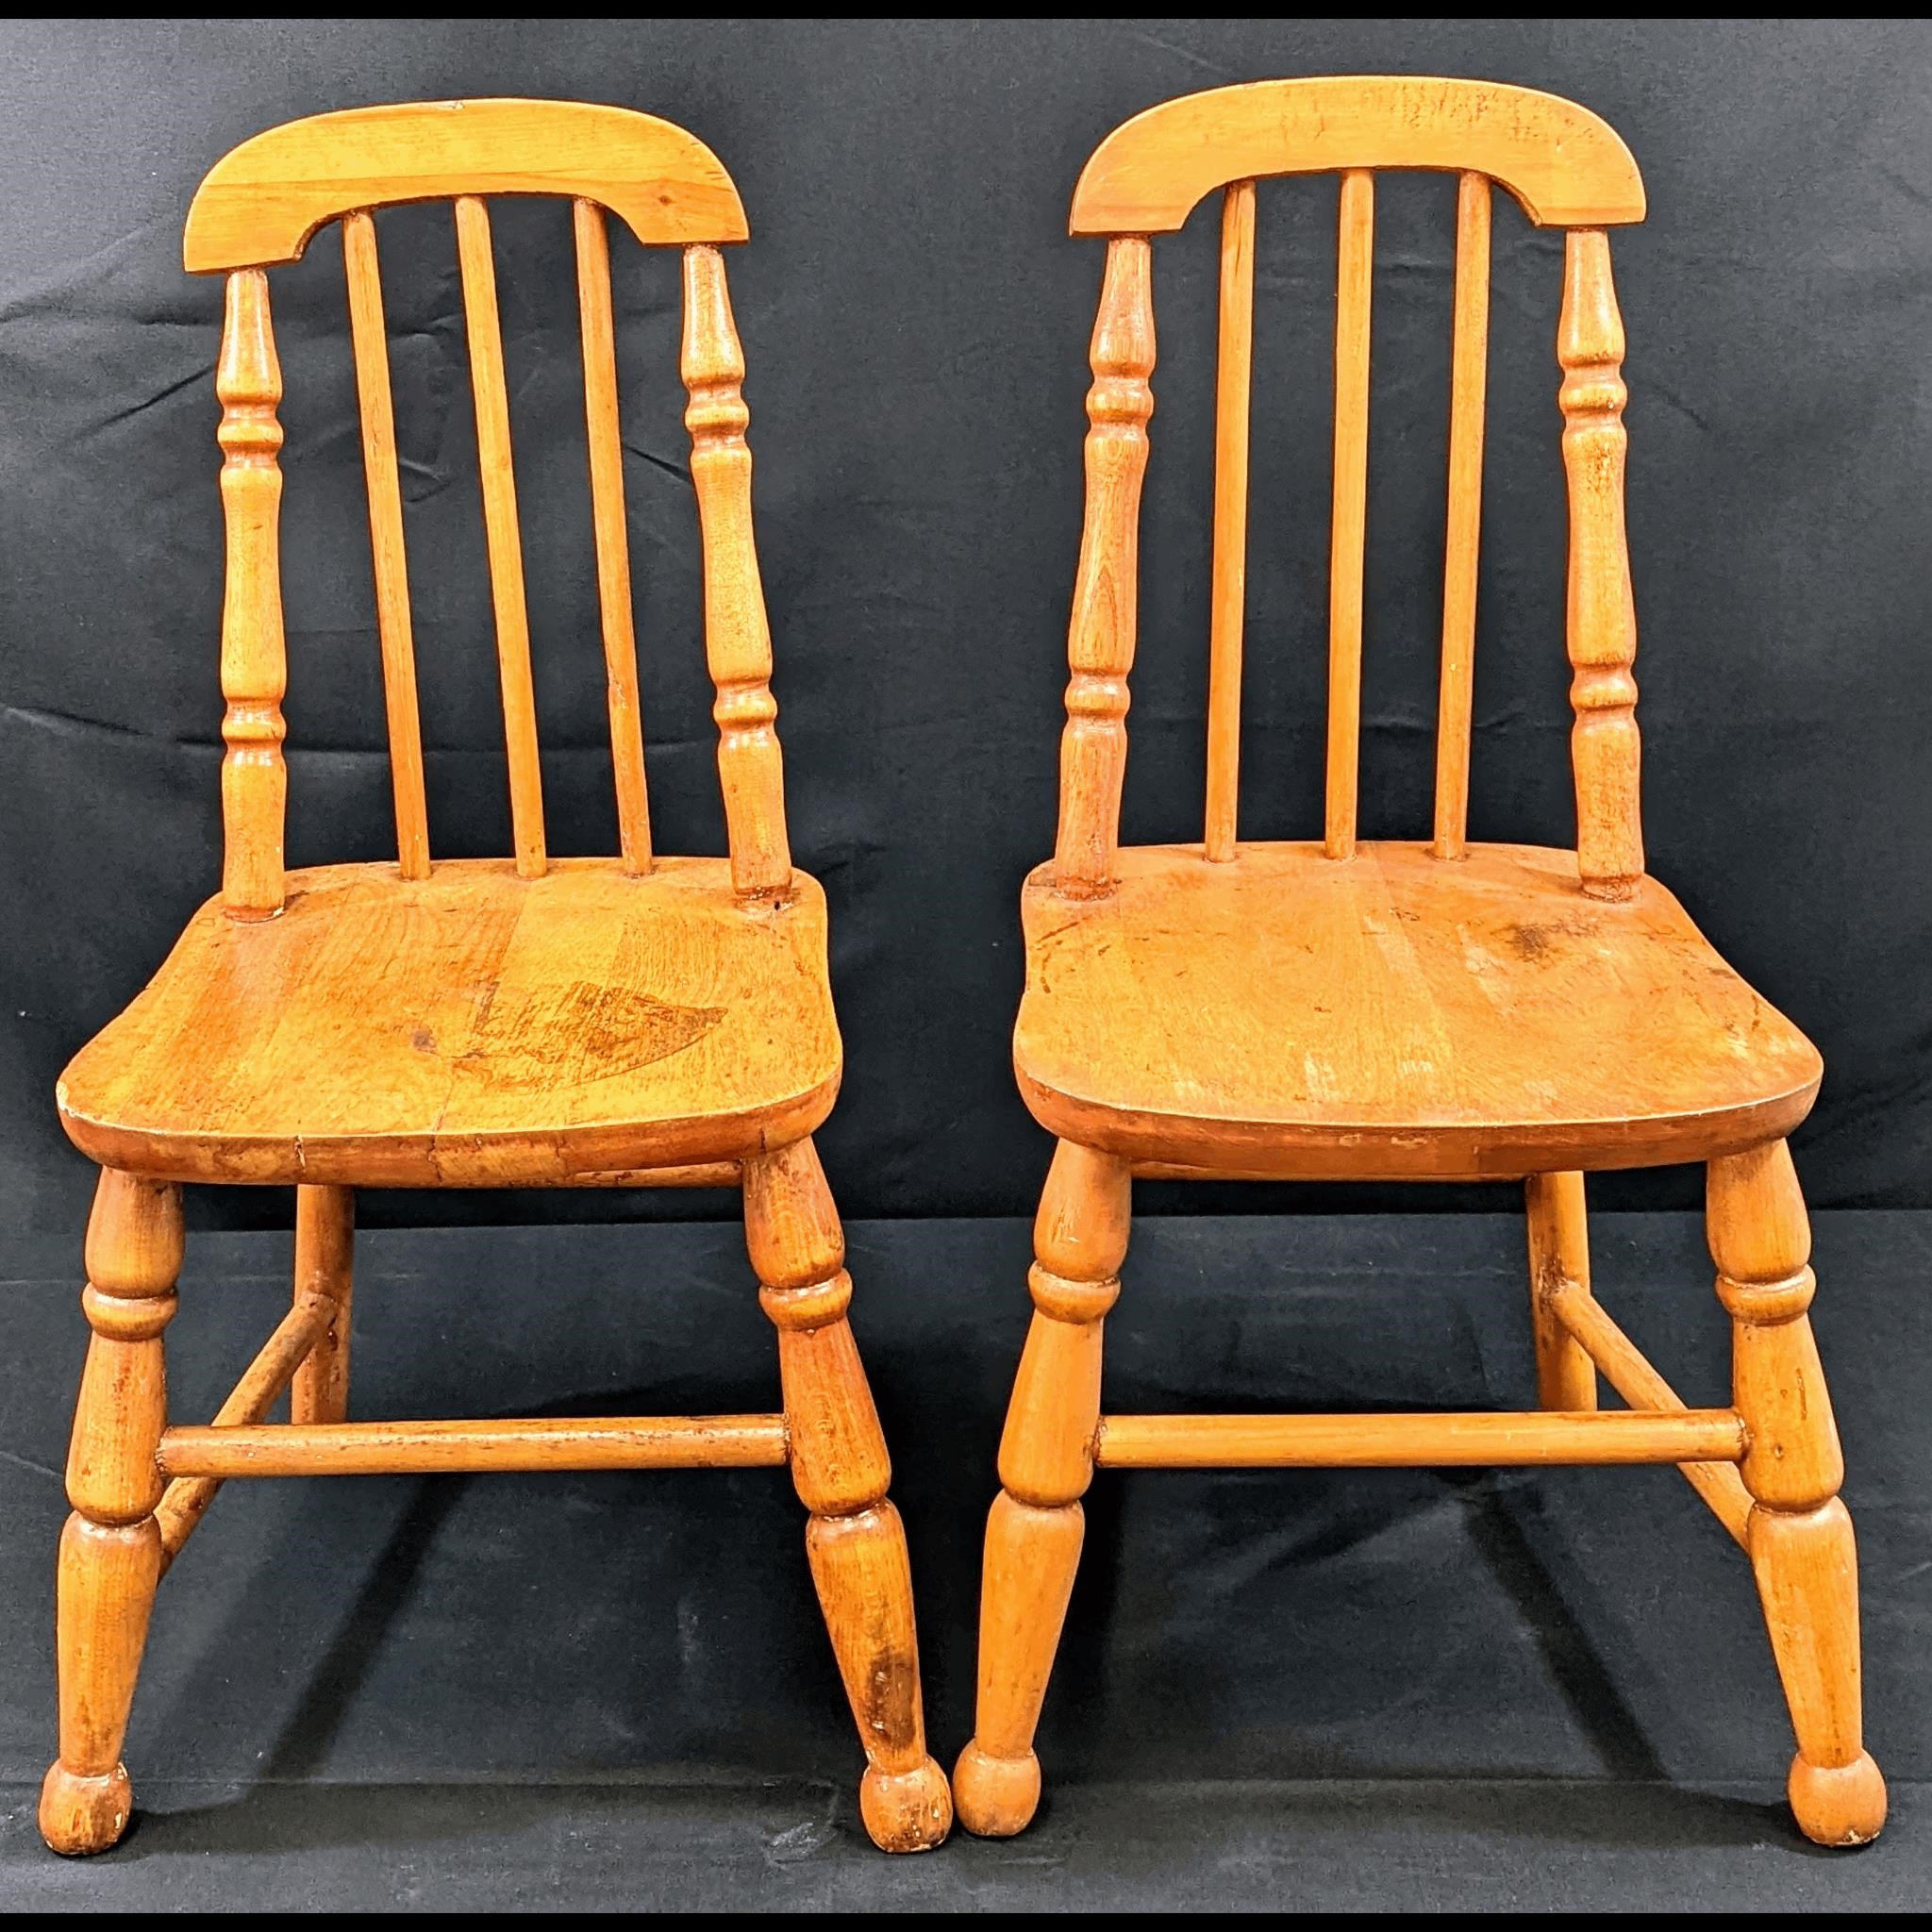 Set of 2 Small Wooden Vintage Chairs